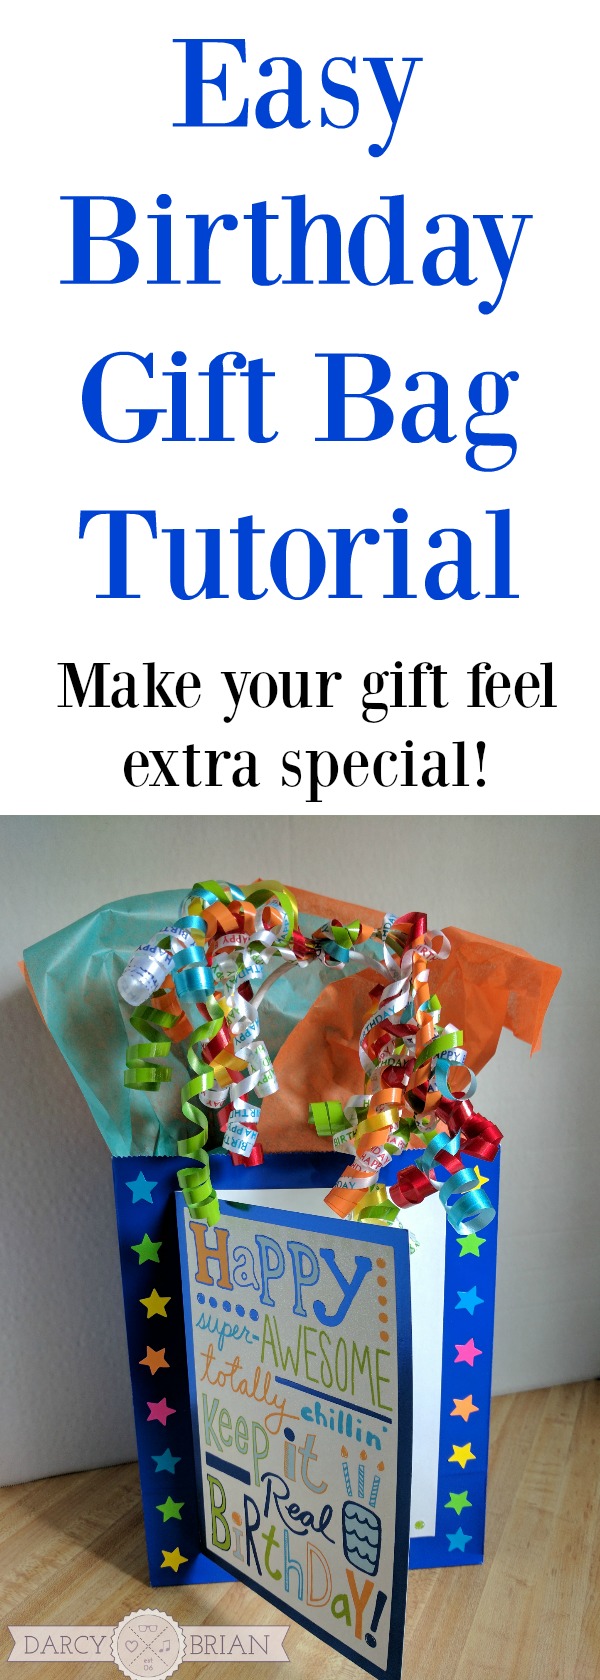 [AD] Brighten up summer birthday gifts and birthday parties for kids with these fun ideas! Check out this tutorial for easy ways to make gift bags feel special. Also find a tutorial for a simple centerpiece that also doubles as a party favor for birthday party guests! #BirthdaysMadeBrighter